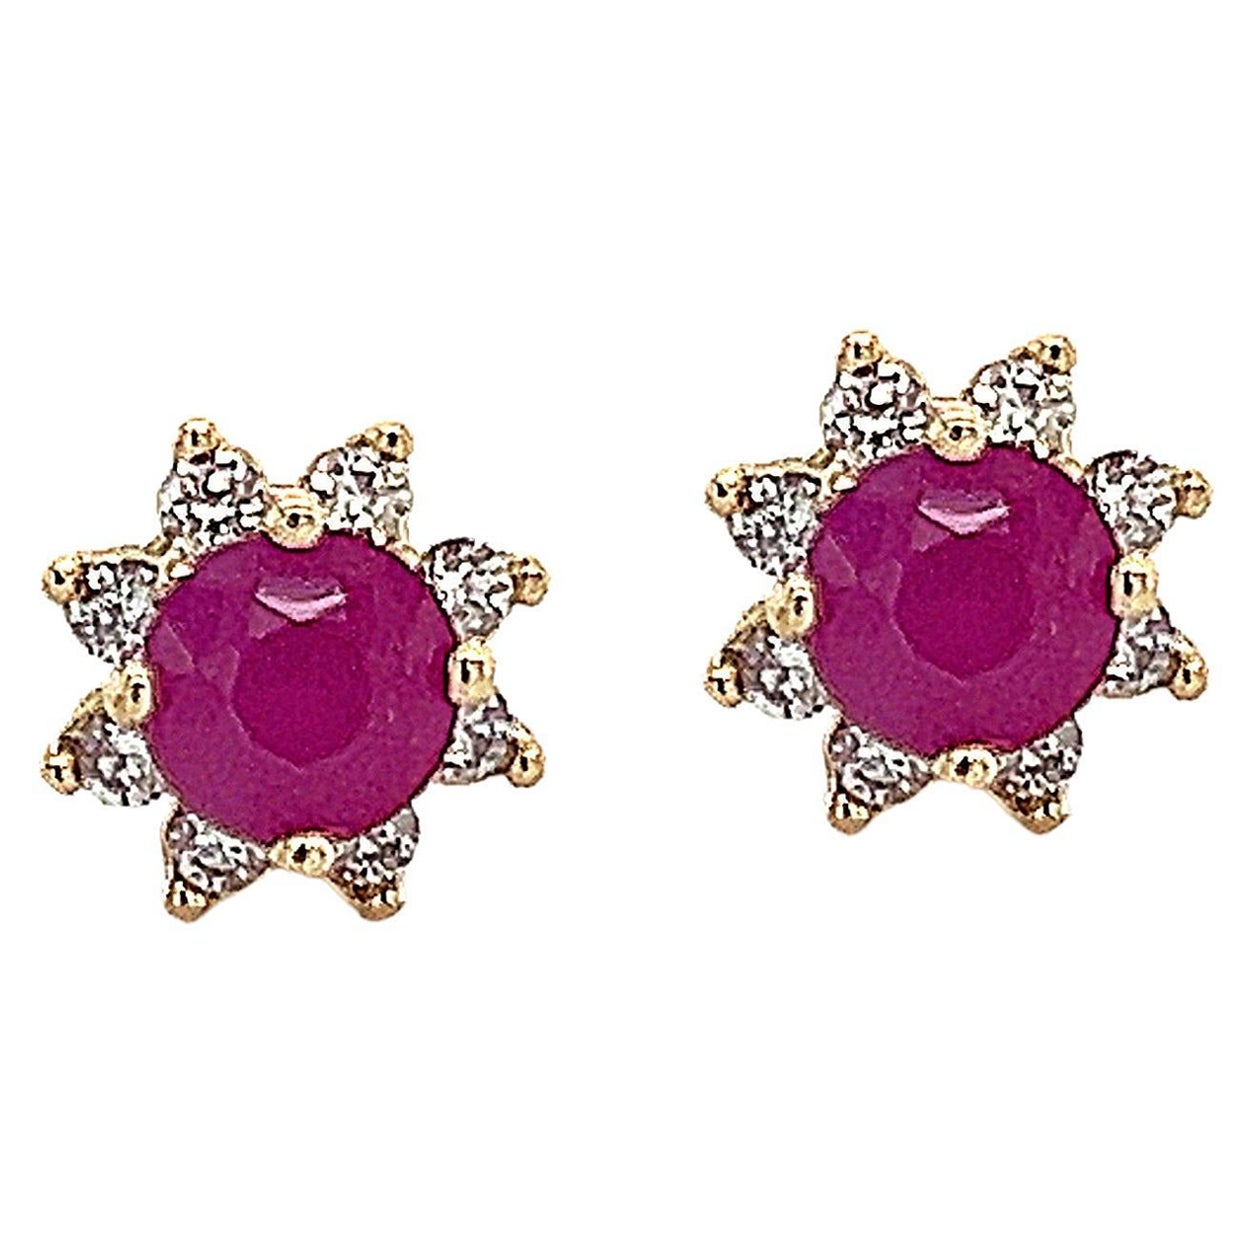 Natural Ruby Diamond Earrings 14k Gold 1.25 TCW Certified For Sale